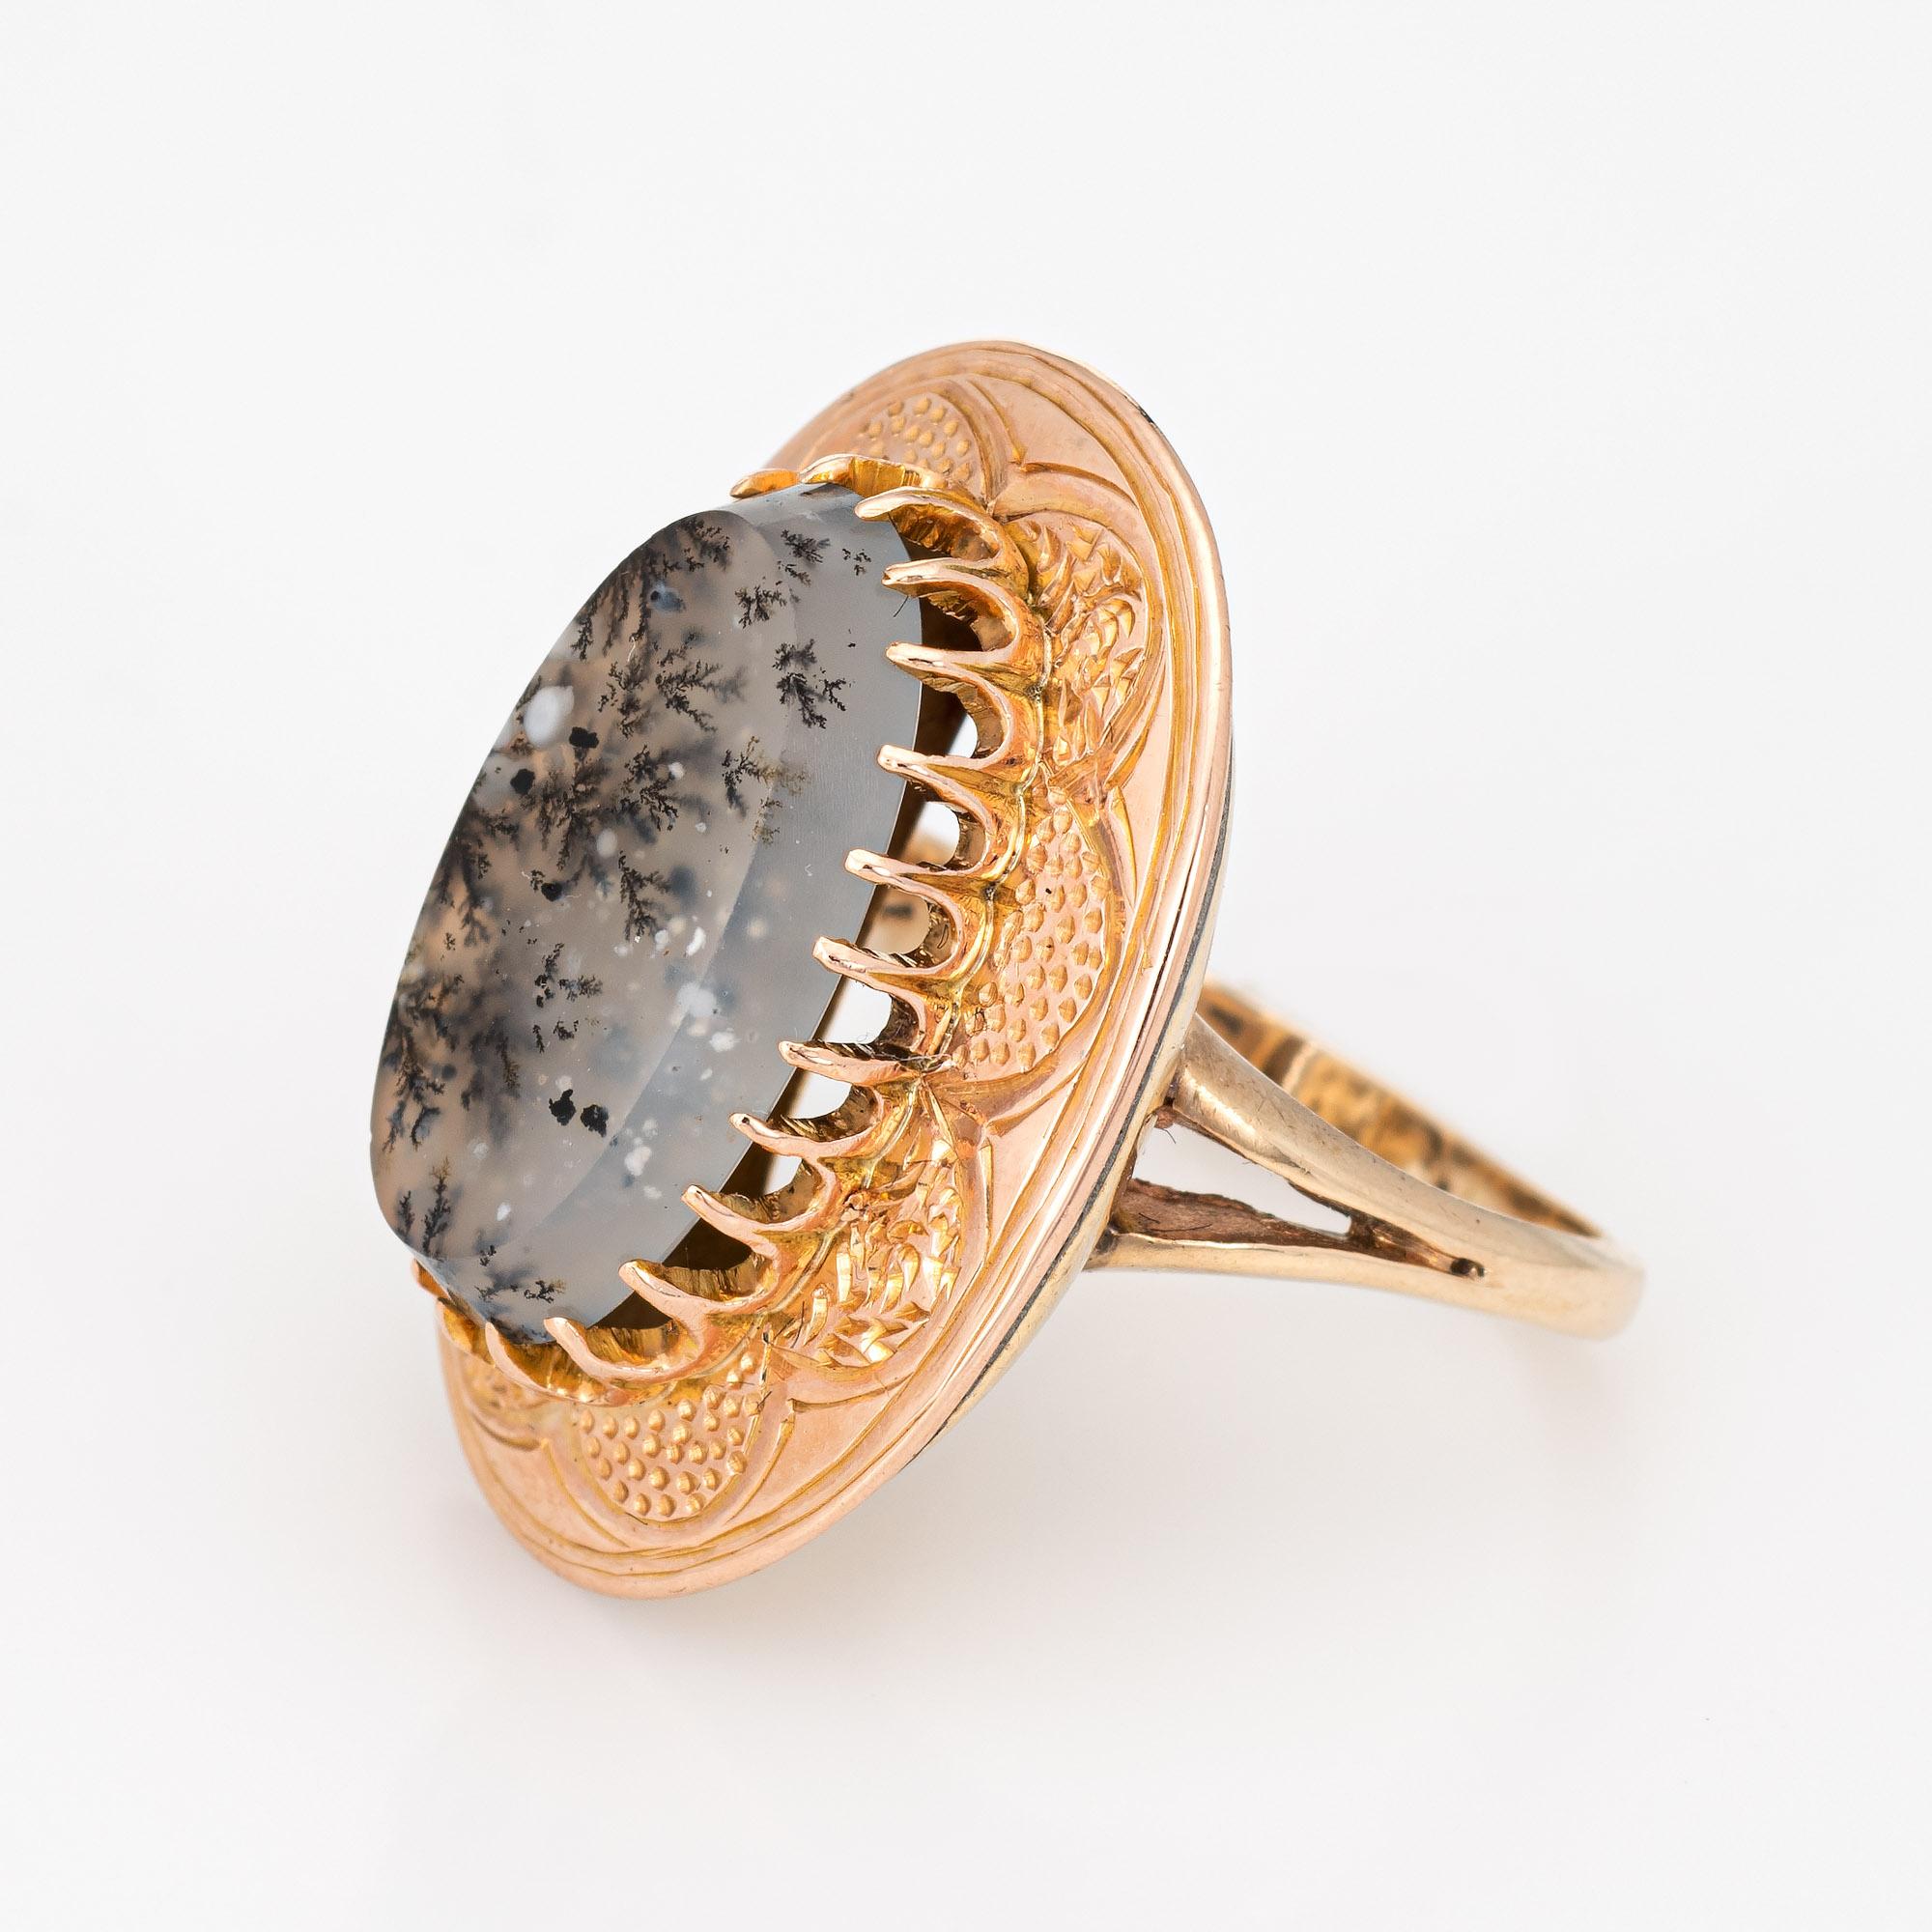 Modern Vintage Moss Agate Ring 10k Rose Gold Large Oval Cocktail Estate Fine Jewelry For Sale